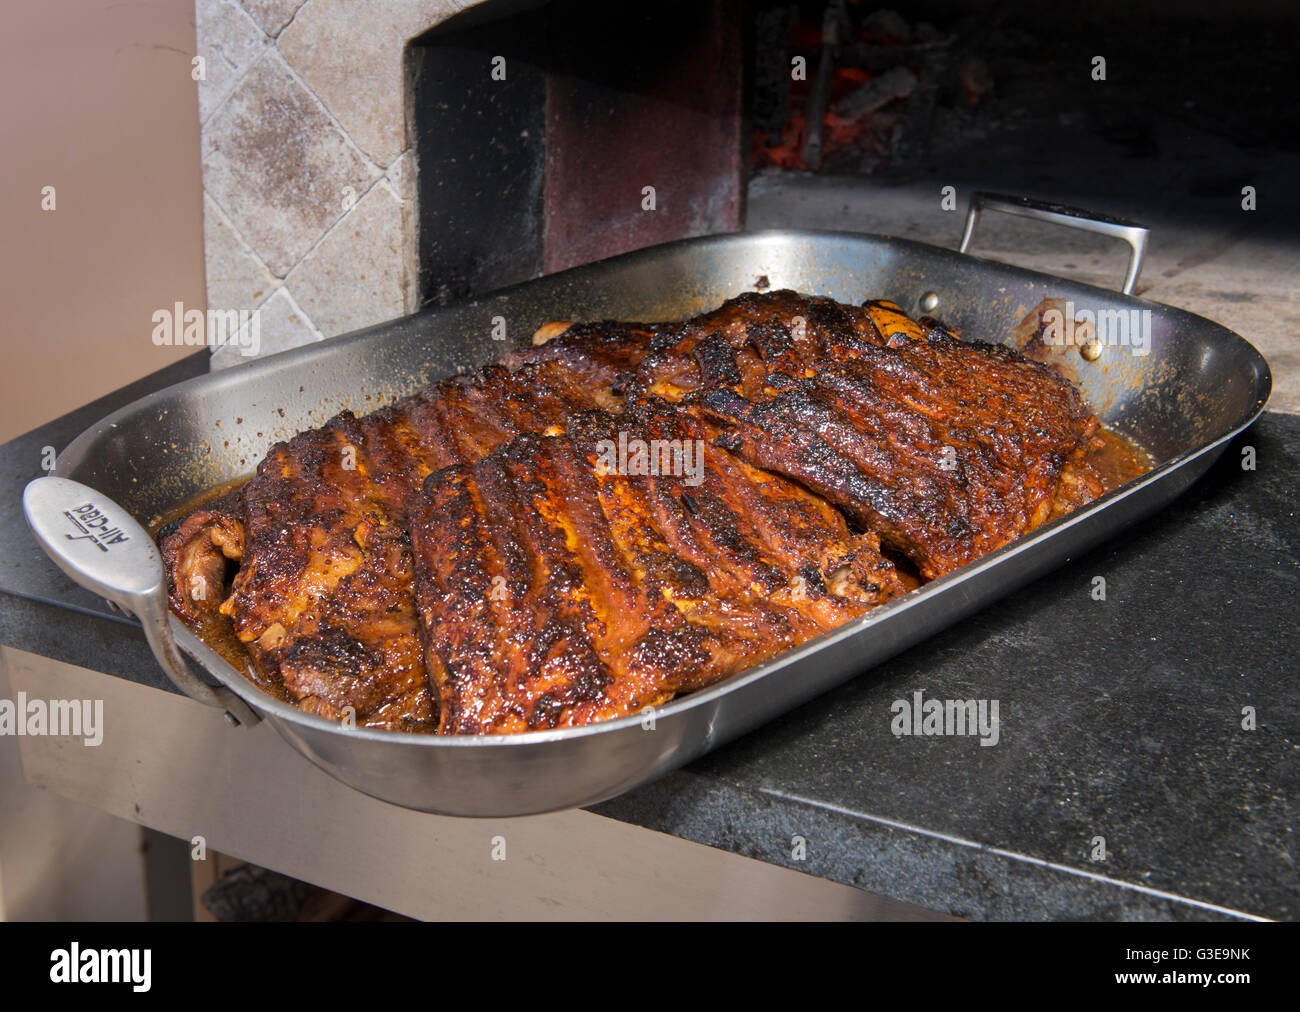 Slow roasted baby back ribs emerge from a wood fired oven. Stock Photo